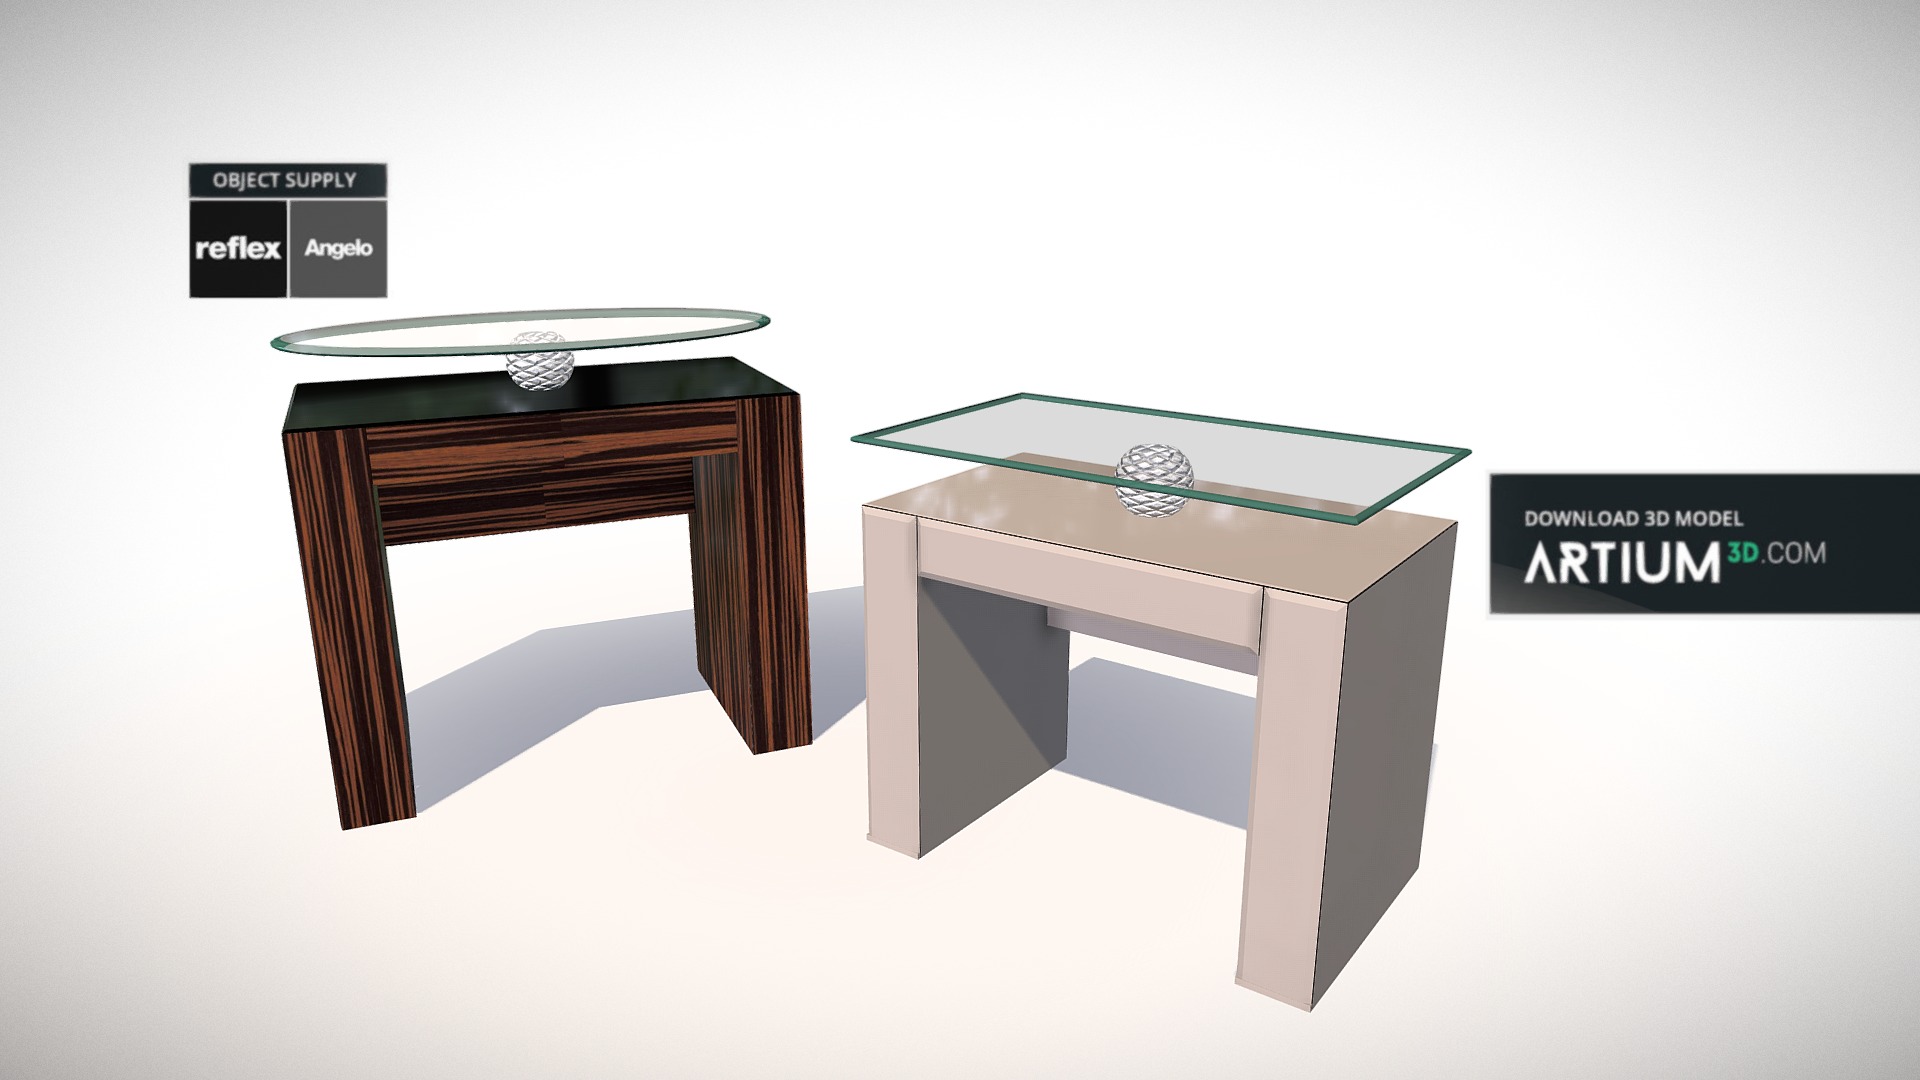 3D model Rialto comodino from Reflex Angelo - This is a 3D model of the Rialto comodino from Reflex Angelo. The 3D model is about a table with a table and chairs.